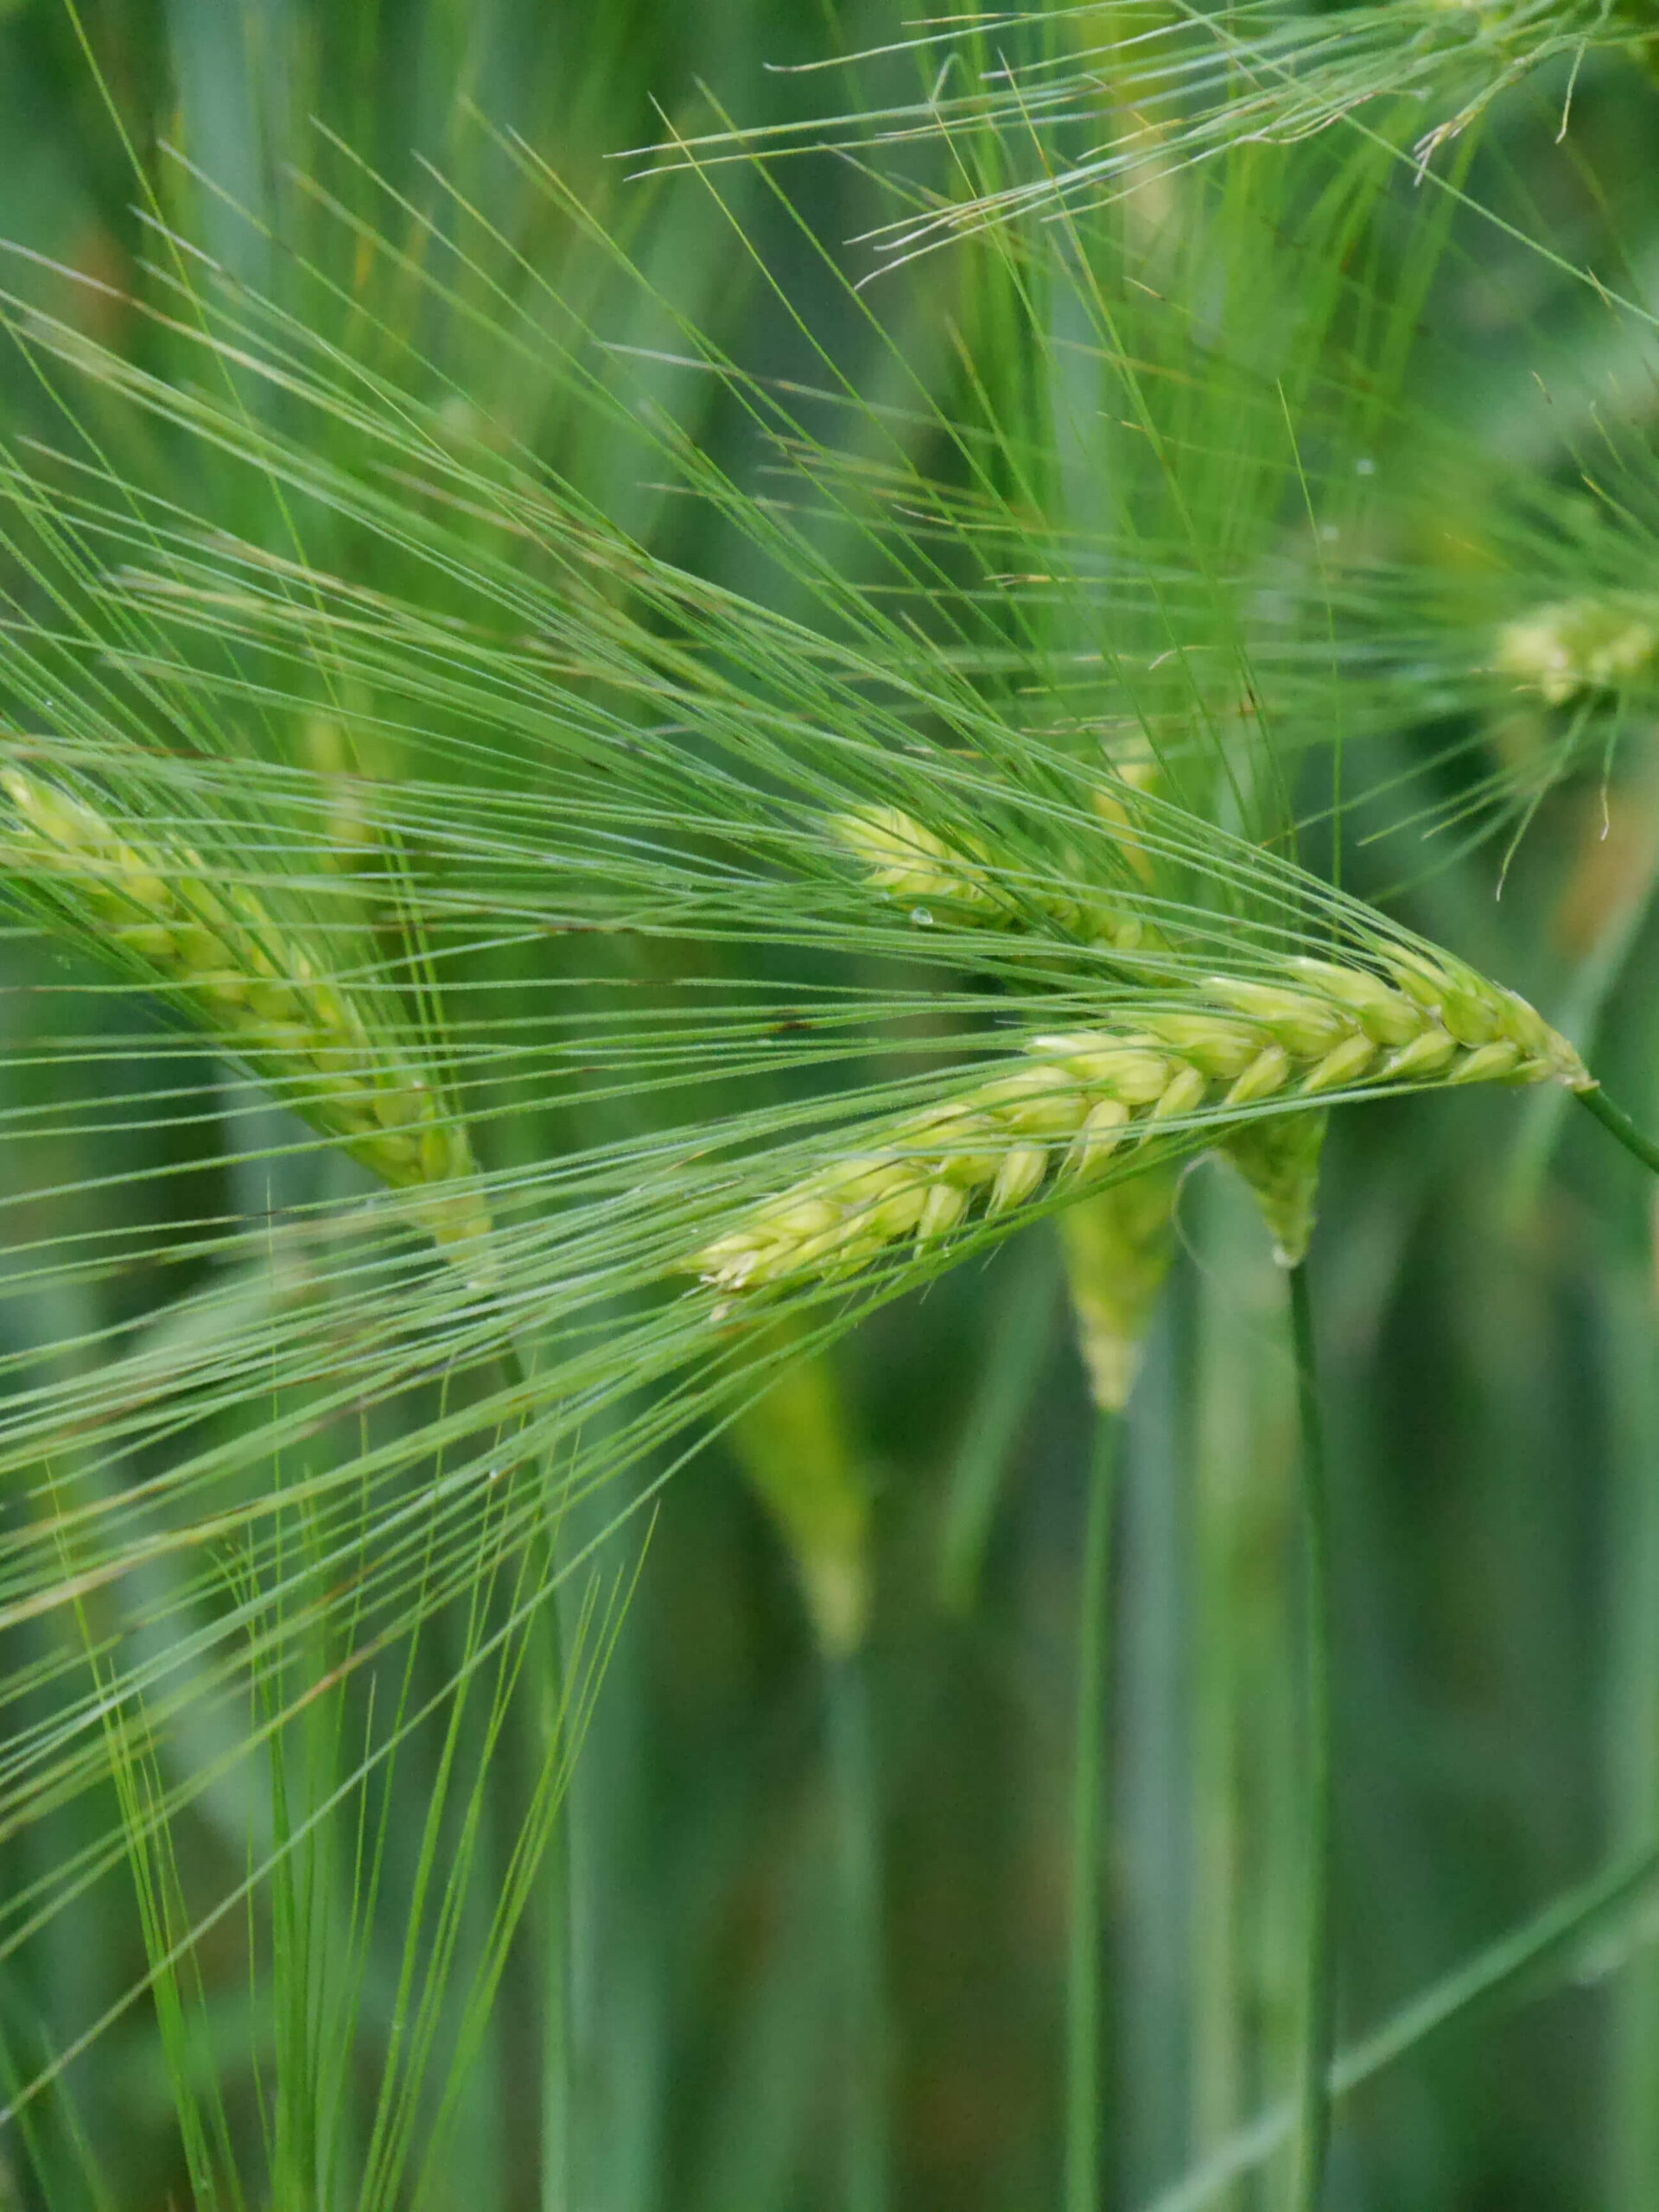 IBH Seminar: First insights into the pre-anthesis tip degeneration of the barley inflorescence